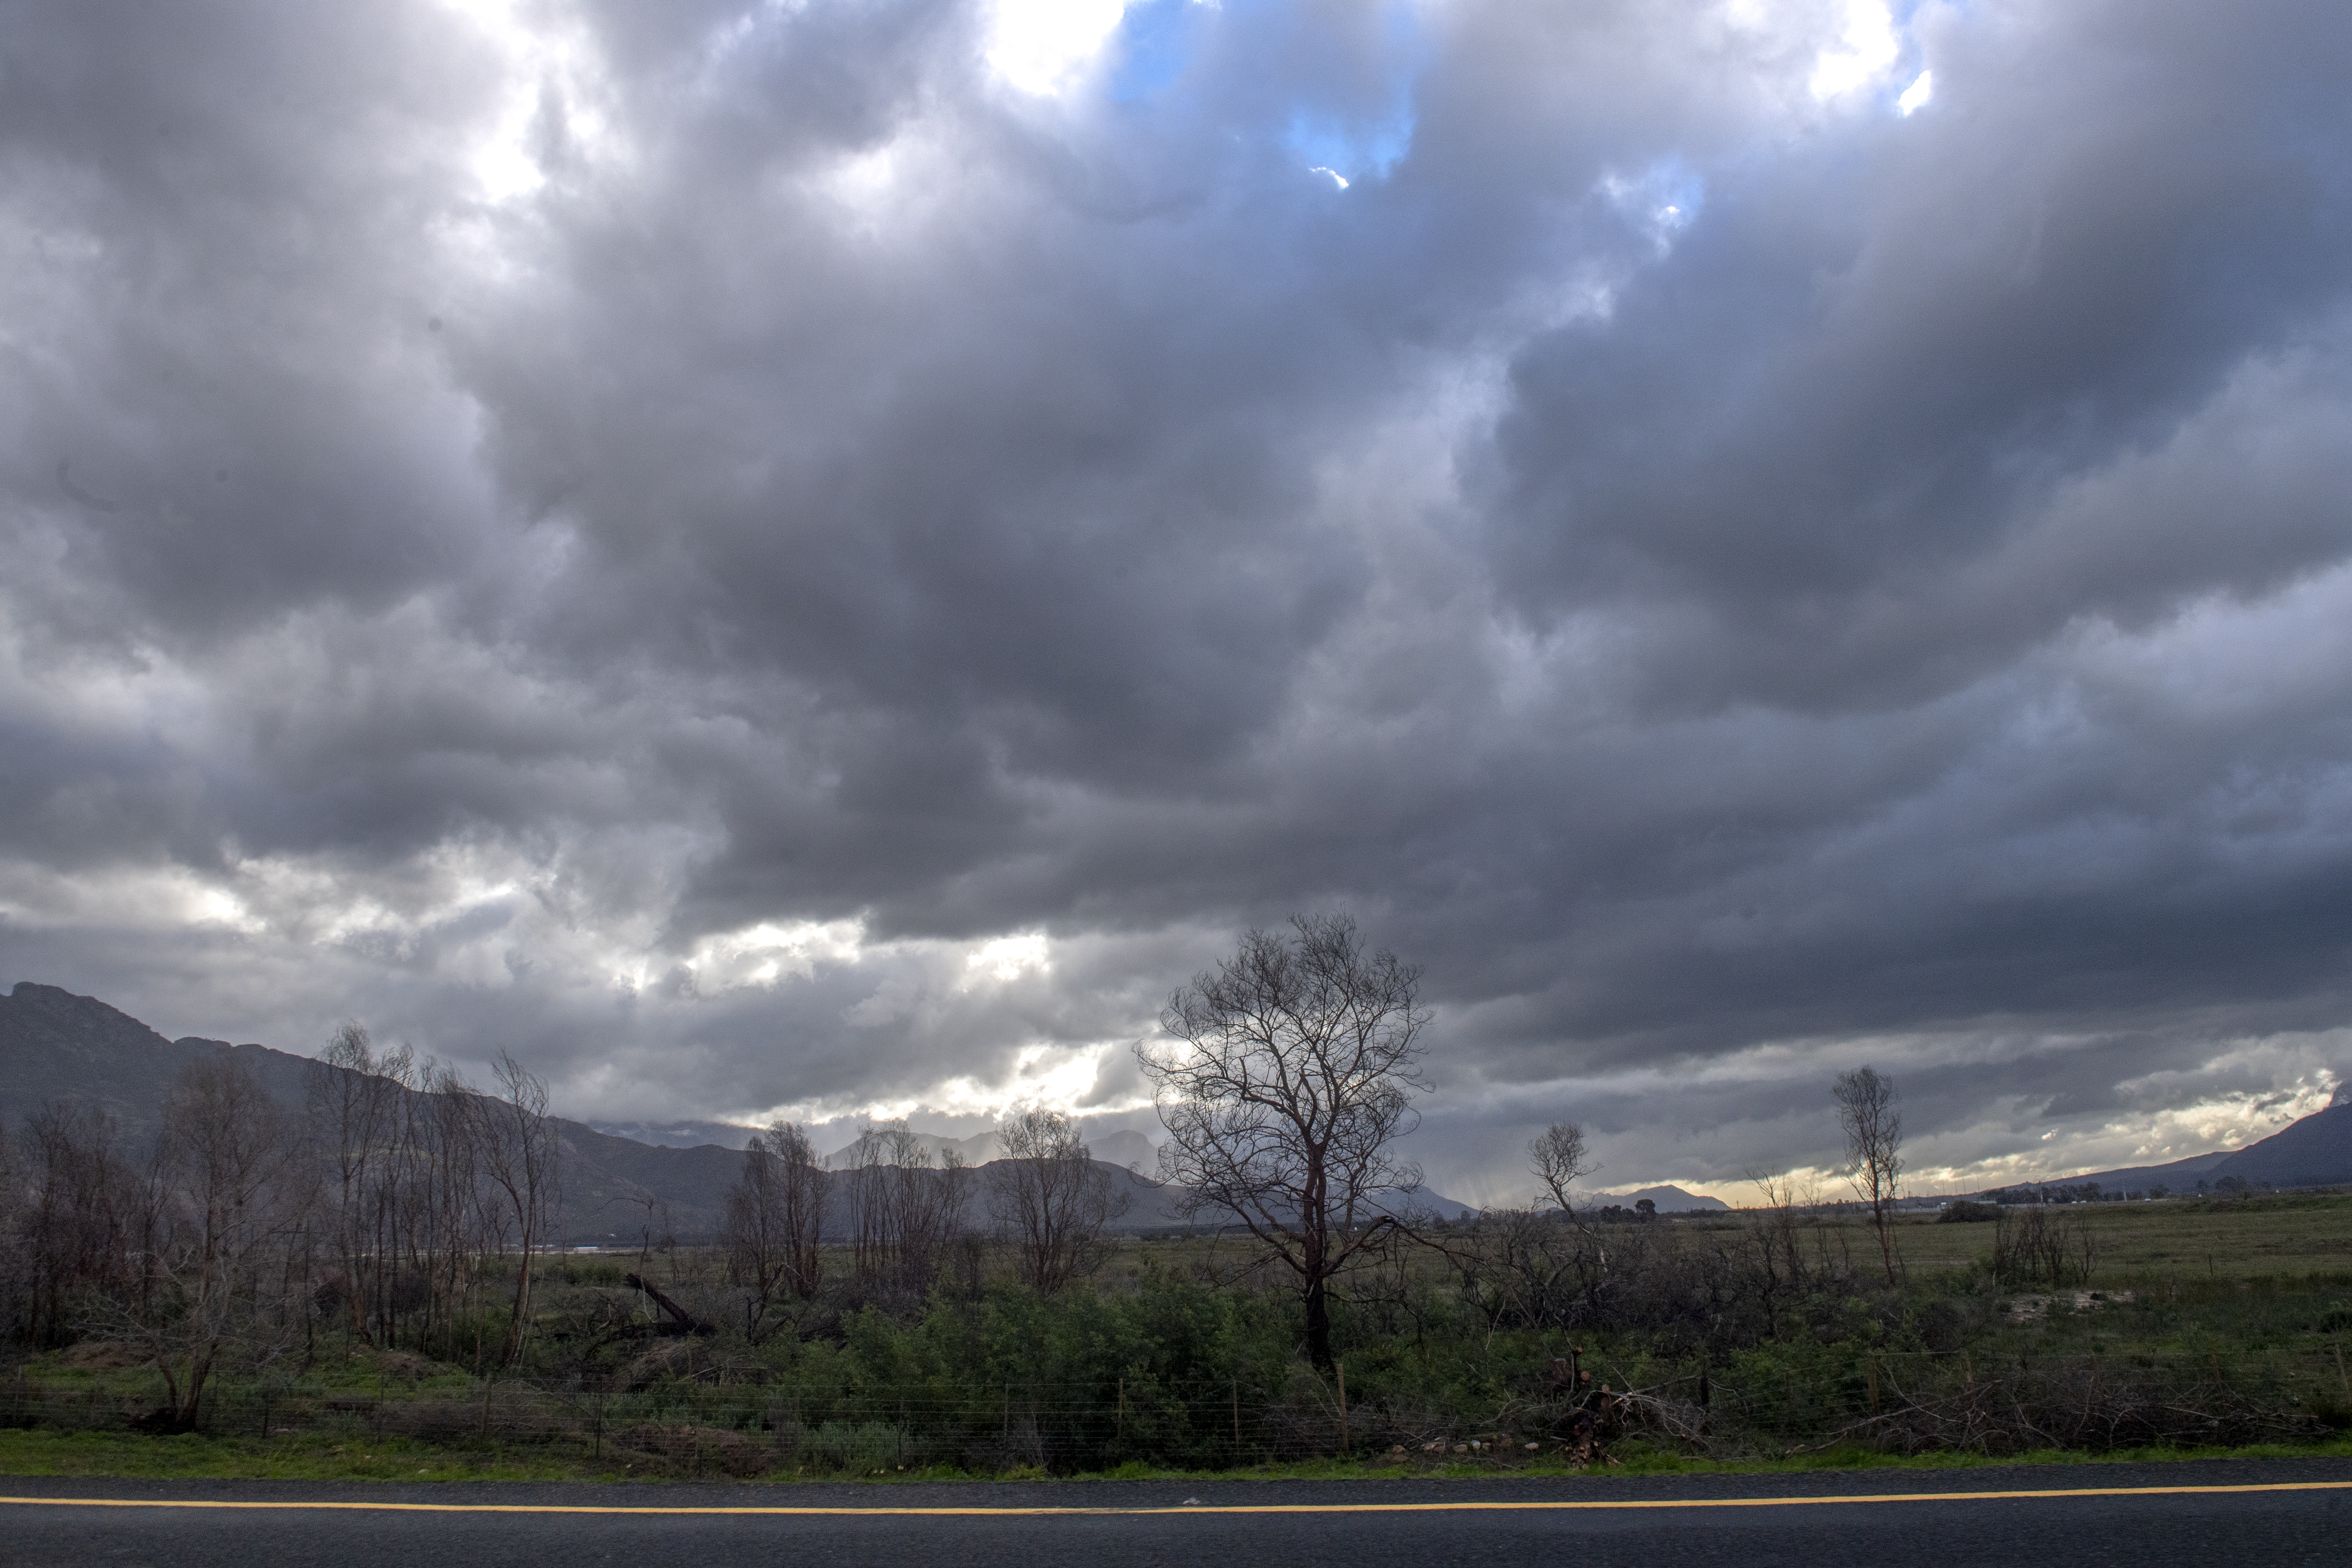 WESTERN CAPE, SOUTH AFRICA  JULY 02: Clouds are seen near Worcester on July 02, 2018 in Western Cape, South Africa. Heavy snowfall in parts of the Western Cape led to closure of several mountain passes. According to the South African Weather Services, very cold conditions are expected across the country as a strong cold front approaches. (Photo by Gallo Images / Netwerk24 / Jaco Marais)